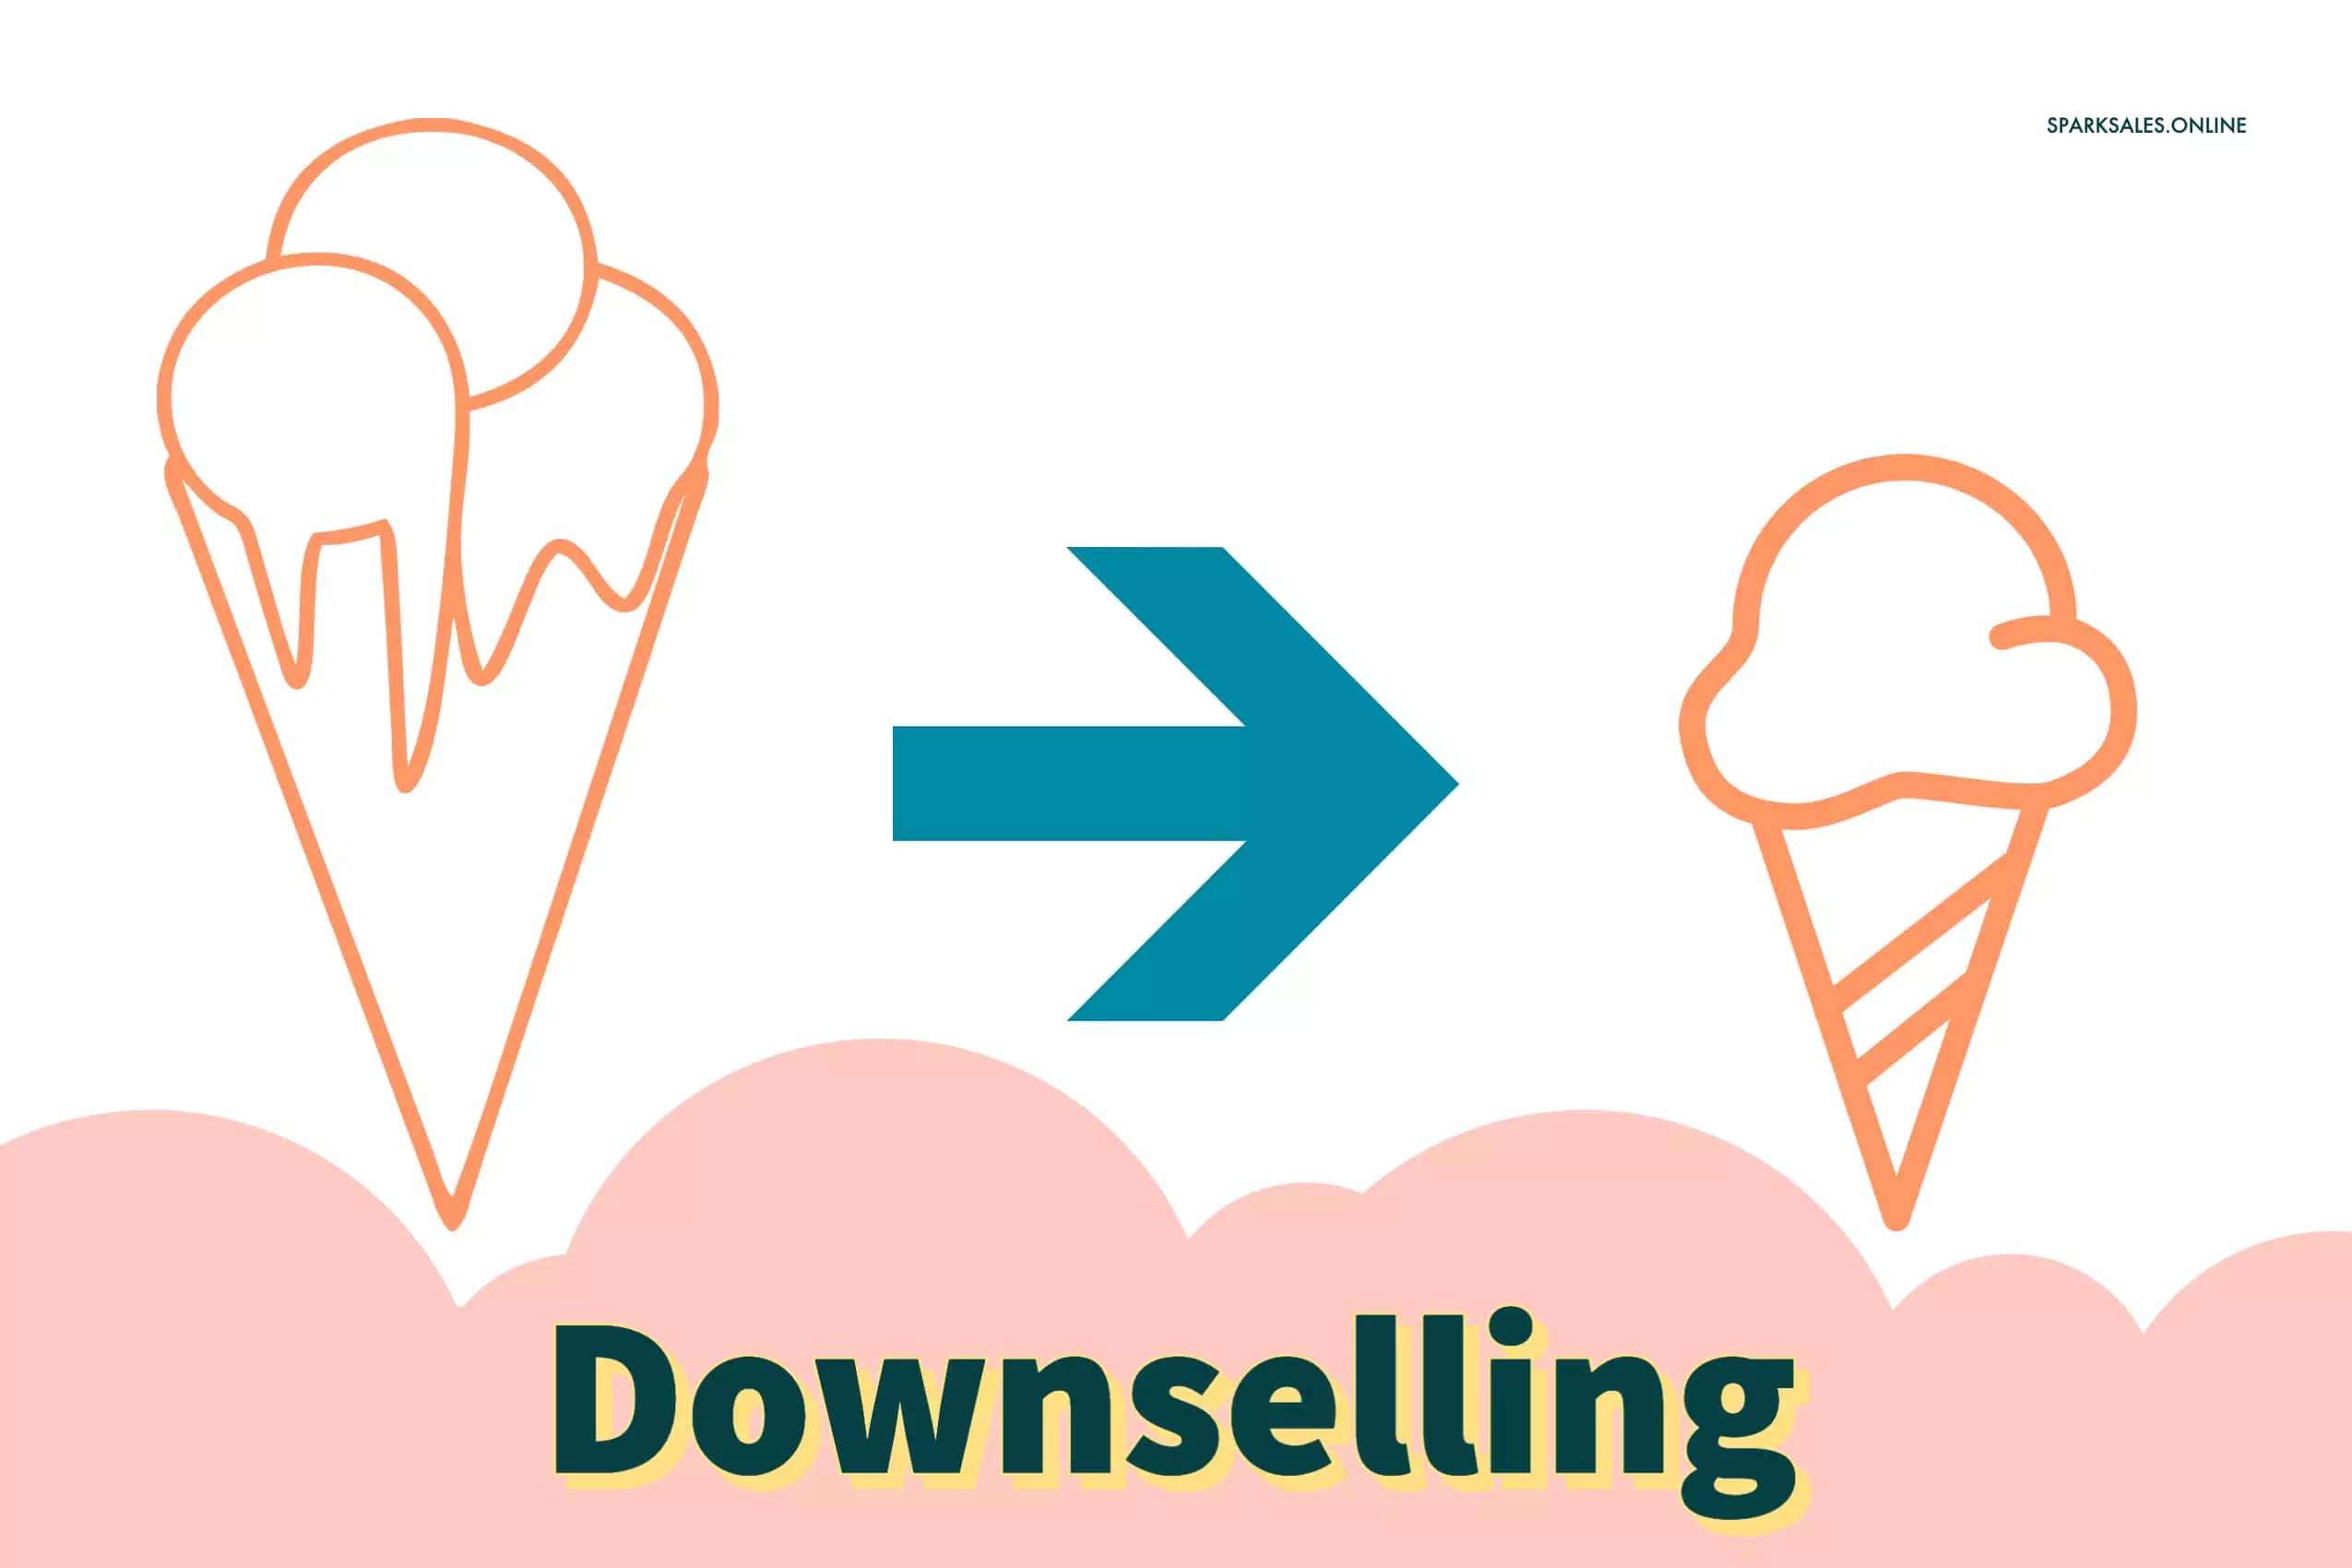 What Is Downselling?